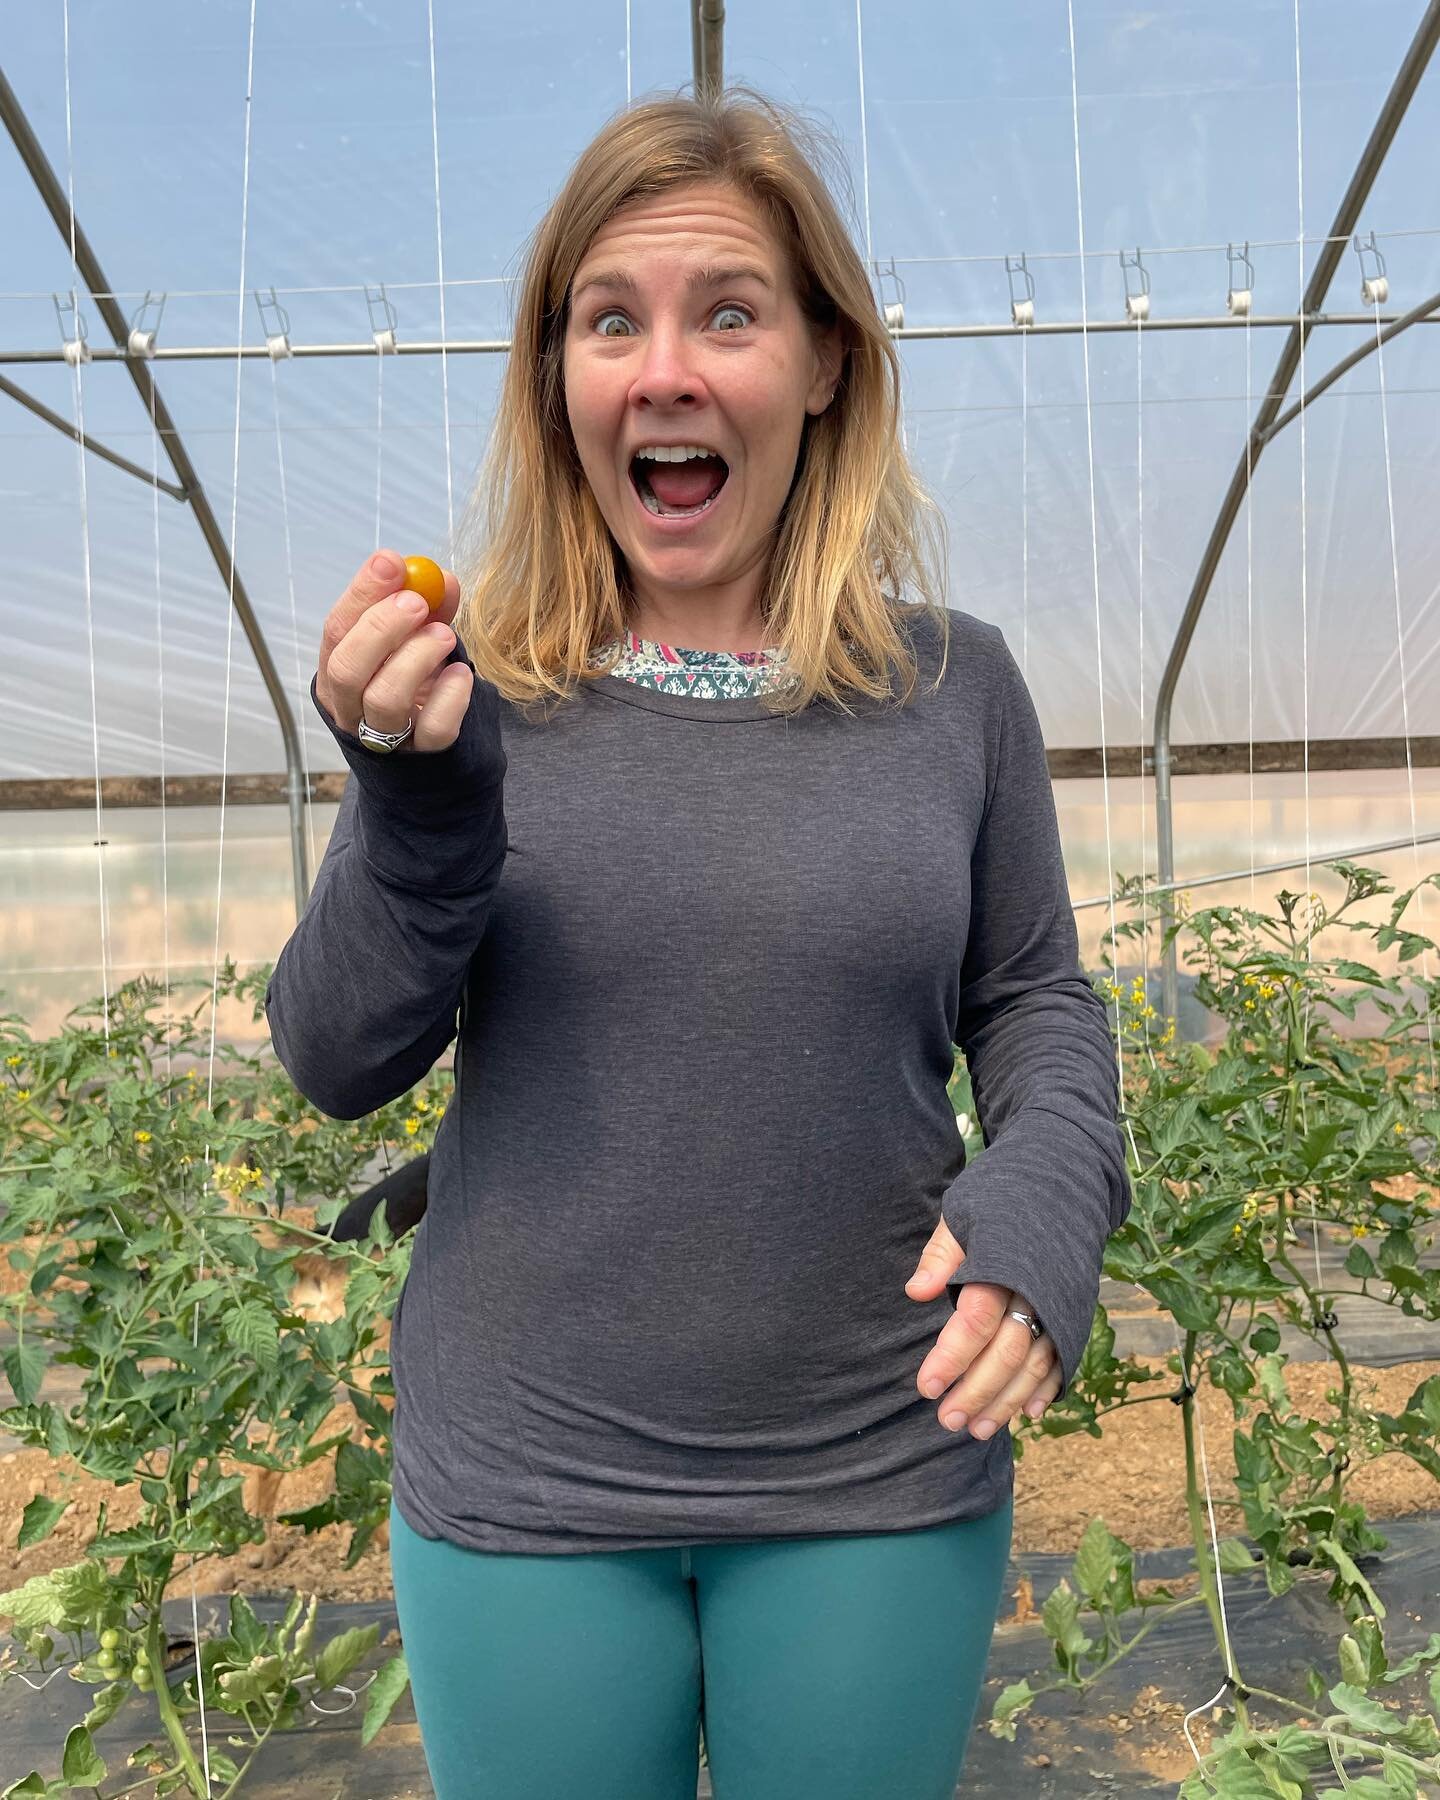 Guess what&rsquo;s coming soon, beautiful CSA members &amp; Chefs?!?! That&rsquo;s right, SUNGOLD TOMATOES!!! 🤩😍😋🍅 Yup, it&rsquo;s back again (SOON, not quite yet) an entire high tunnel full of y&rsquo;all&rsquo;s favorite summertime treat. Fresh